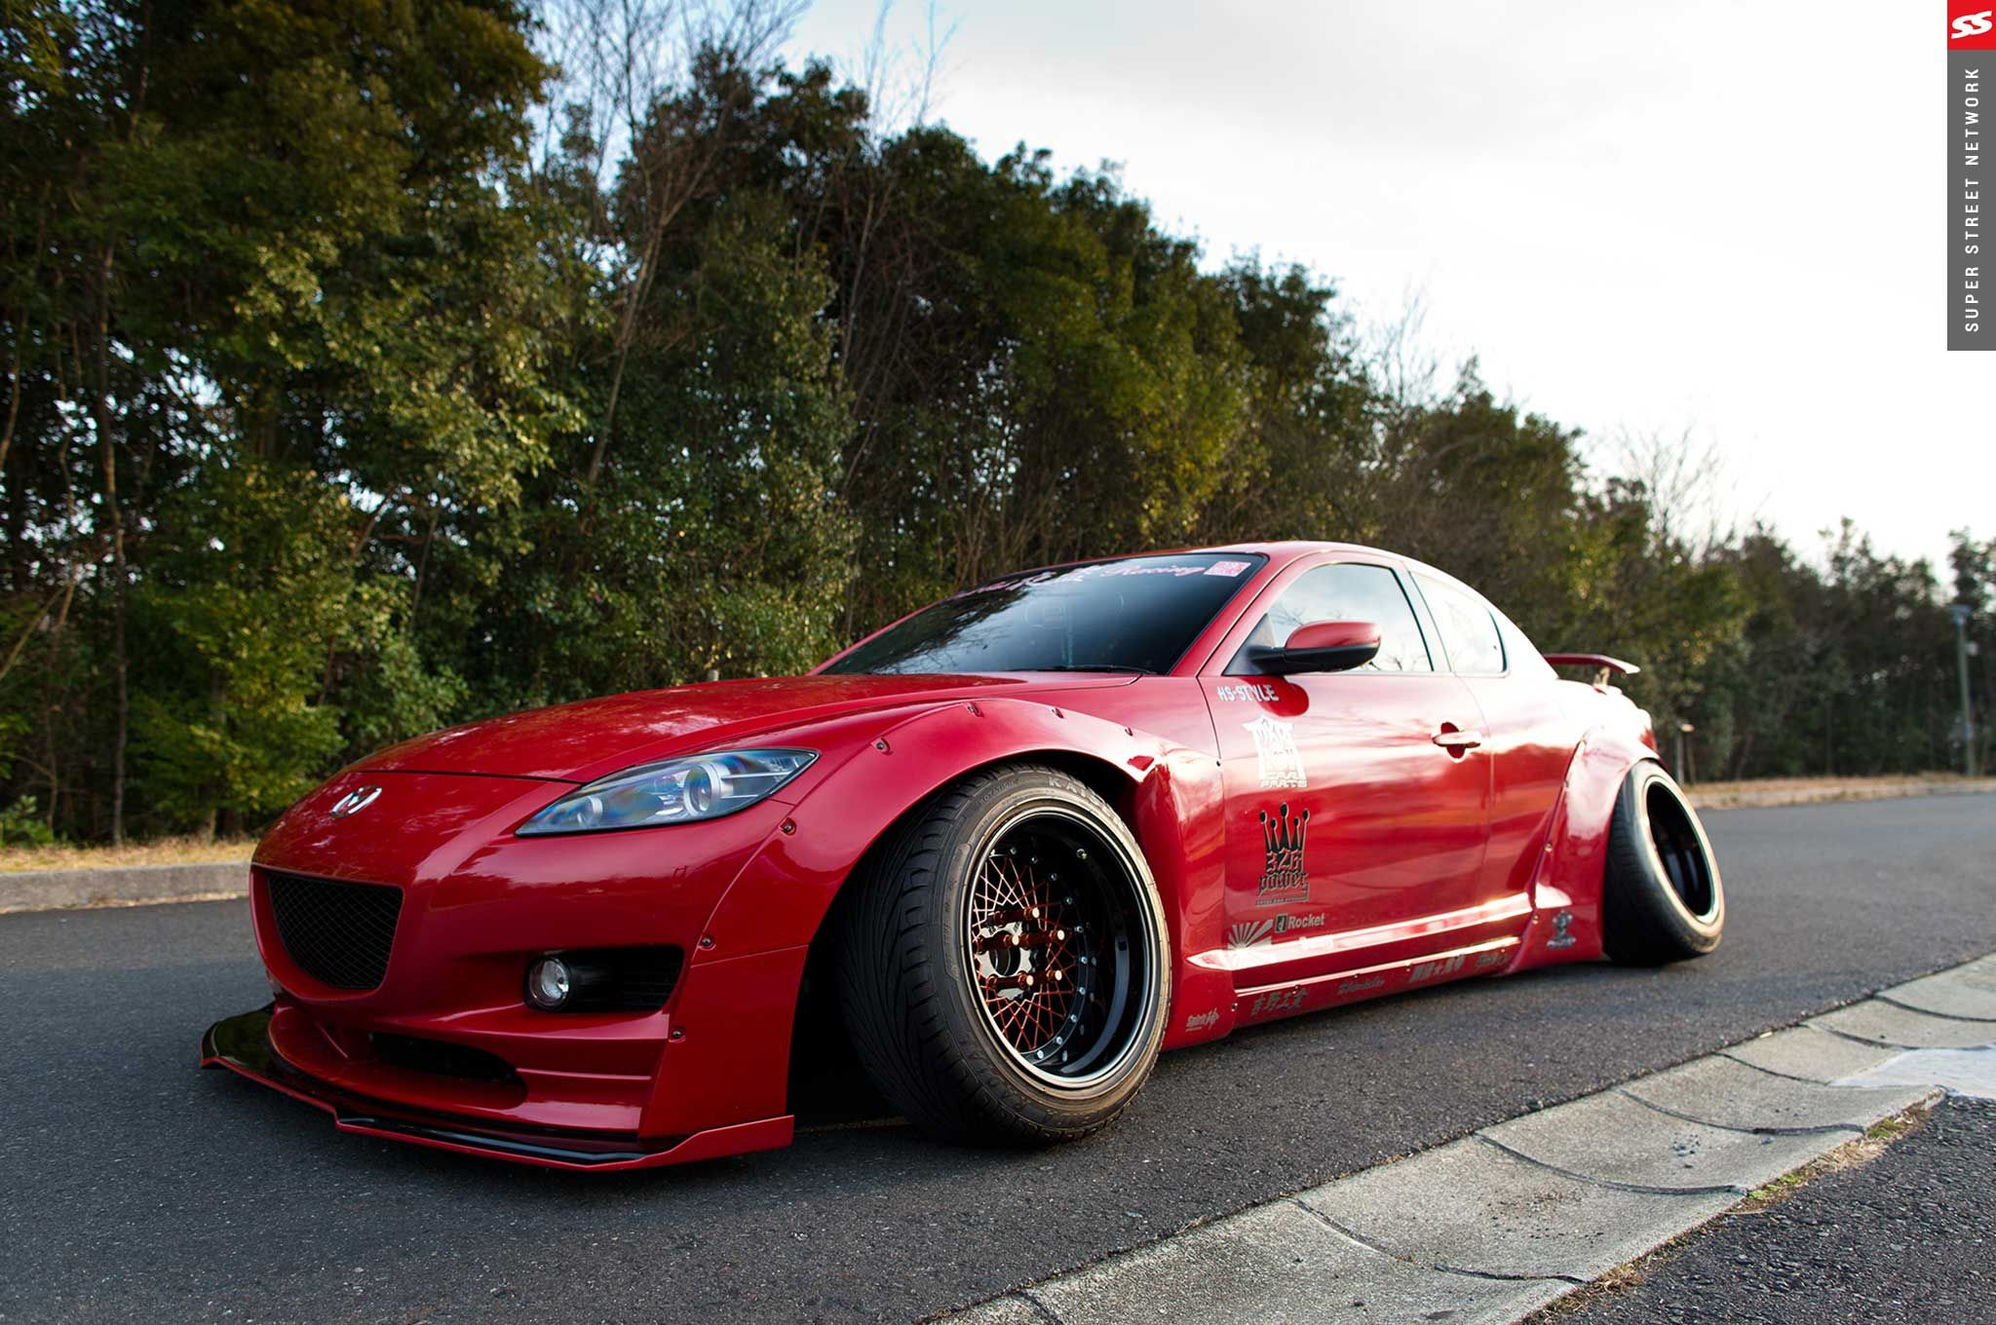 Mazda Rx8 Body Kit : RX8 now has a body kit! - MustangForums.com - Find many great new & used options and get the best deals for mazda rx8 bodykit body kit front bumper at the best online prices at ebay!